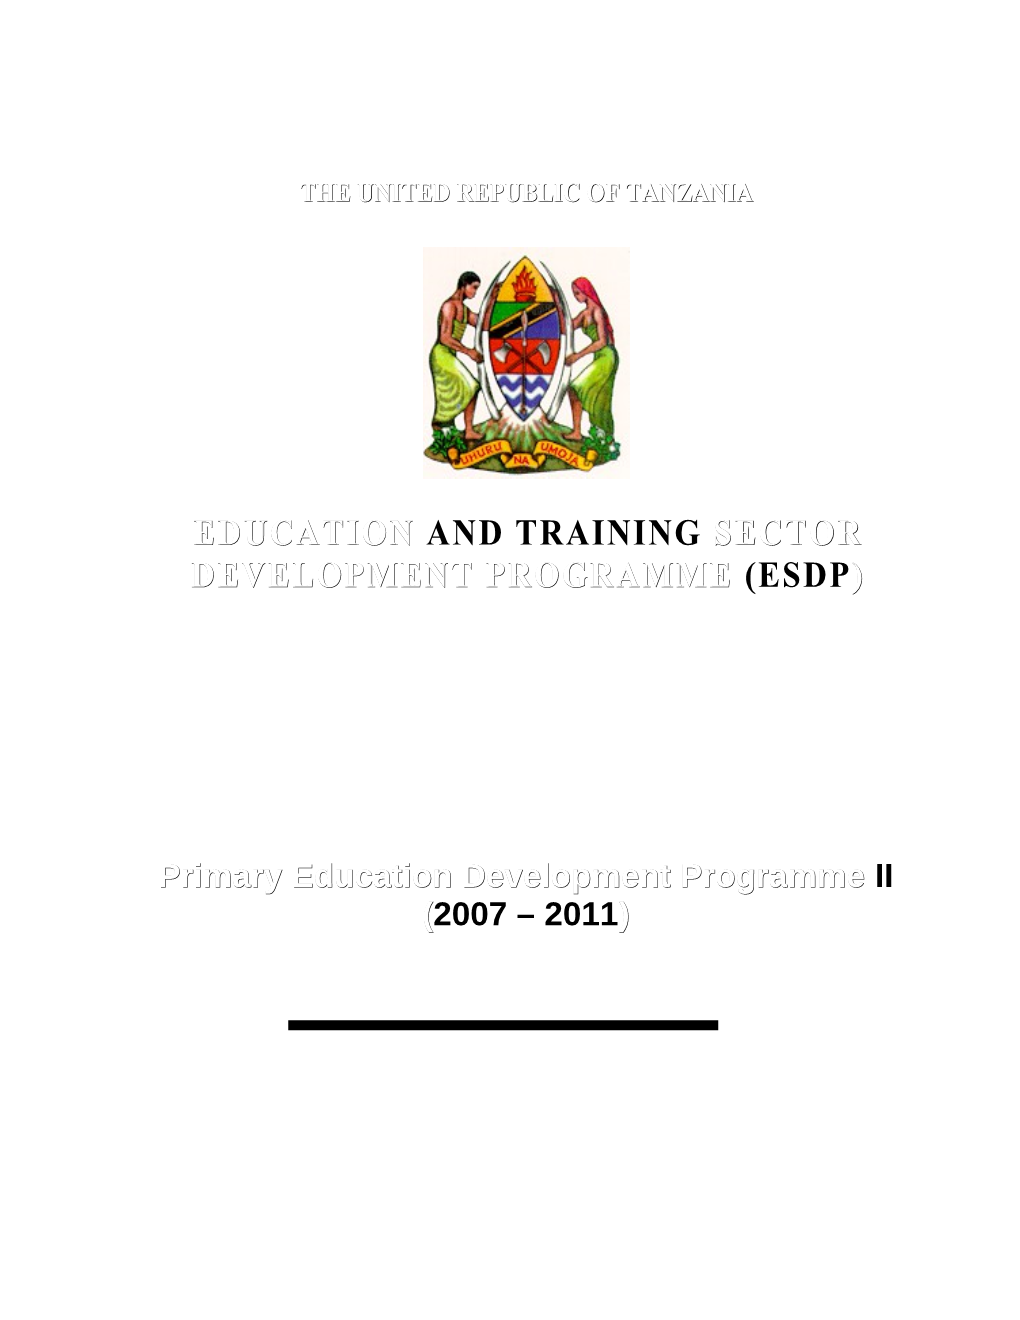 Education and Training Sector Development Programme (Esdp)